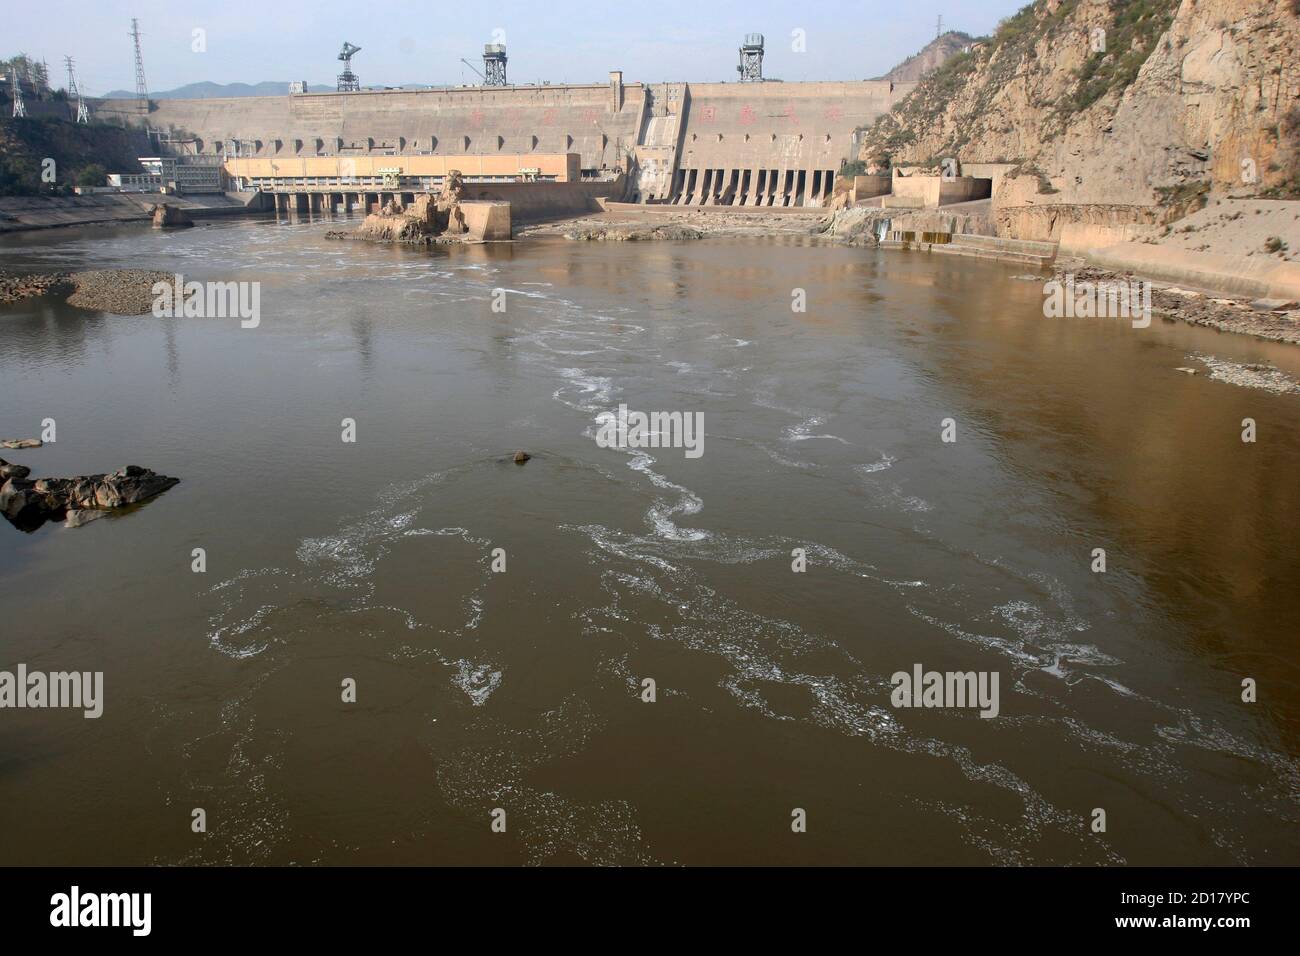 A general view of the Sanmenxia reservoir in the city of Sanmenxia, central China's province of Henan November 9, 2006. REUTERS/Carl F.Zhang (CHINA) Stock Photo